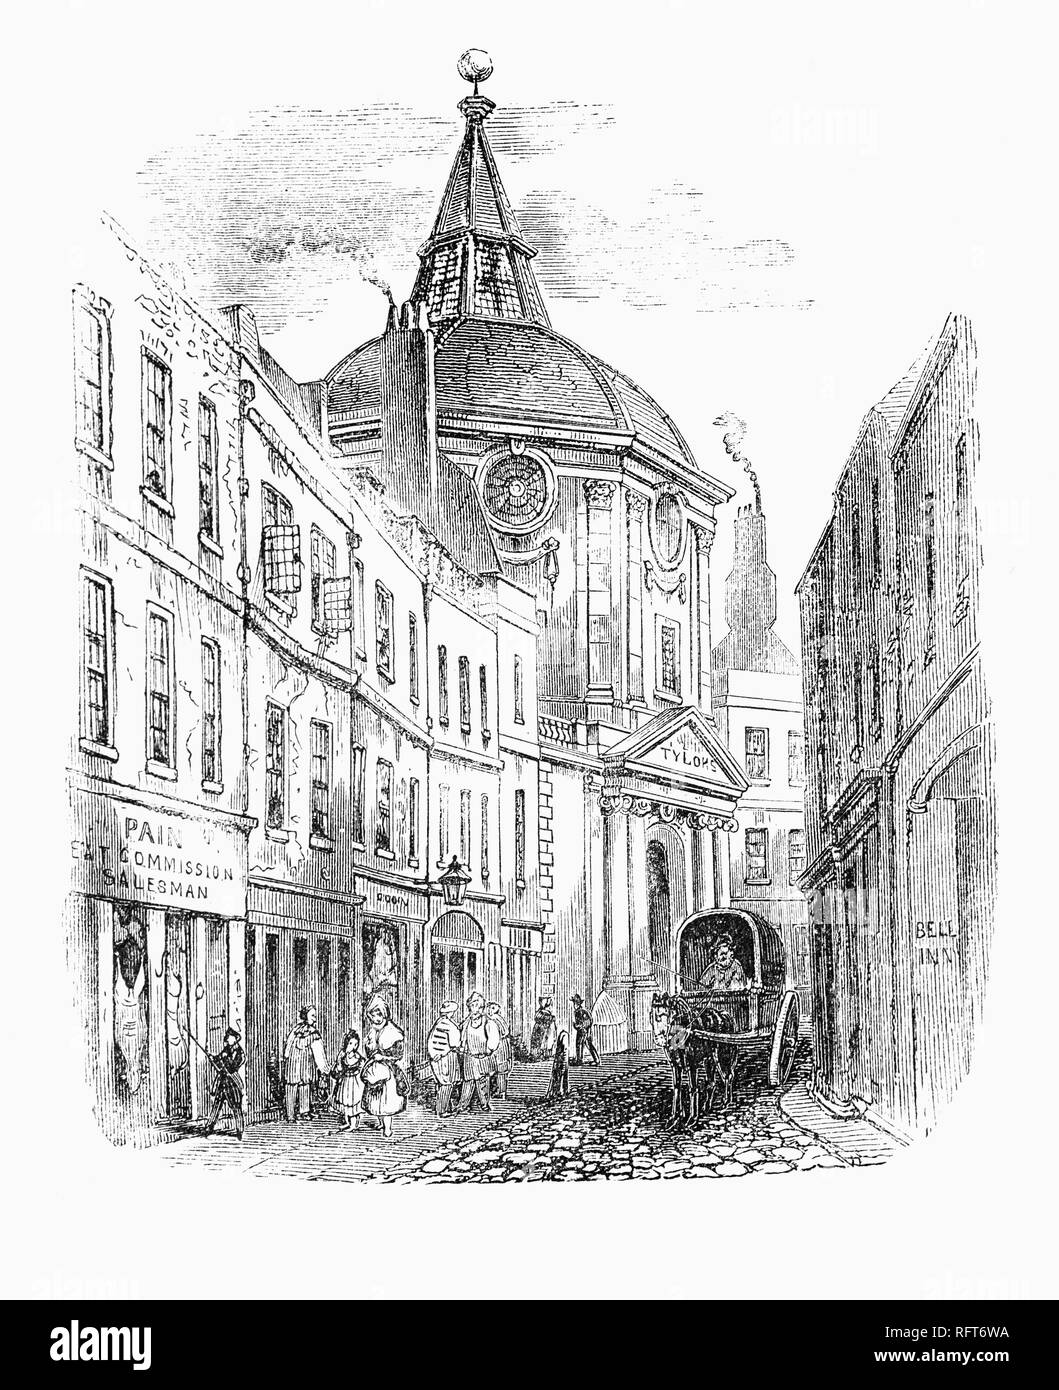 An 1841 view of the old College of Physicians in Warwick Lane, in London, England. In September 1666, the College of Physicians’ home in the City of London, was completely destroyed by the Great Fire.  The physicians then moved into a spectacularly grand and opulently redesigned home in 1678 in Warwick Lane – close to their destroyed home in Amen Corner. Stock Photo